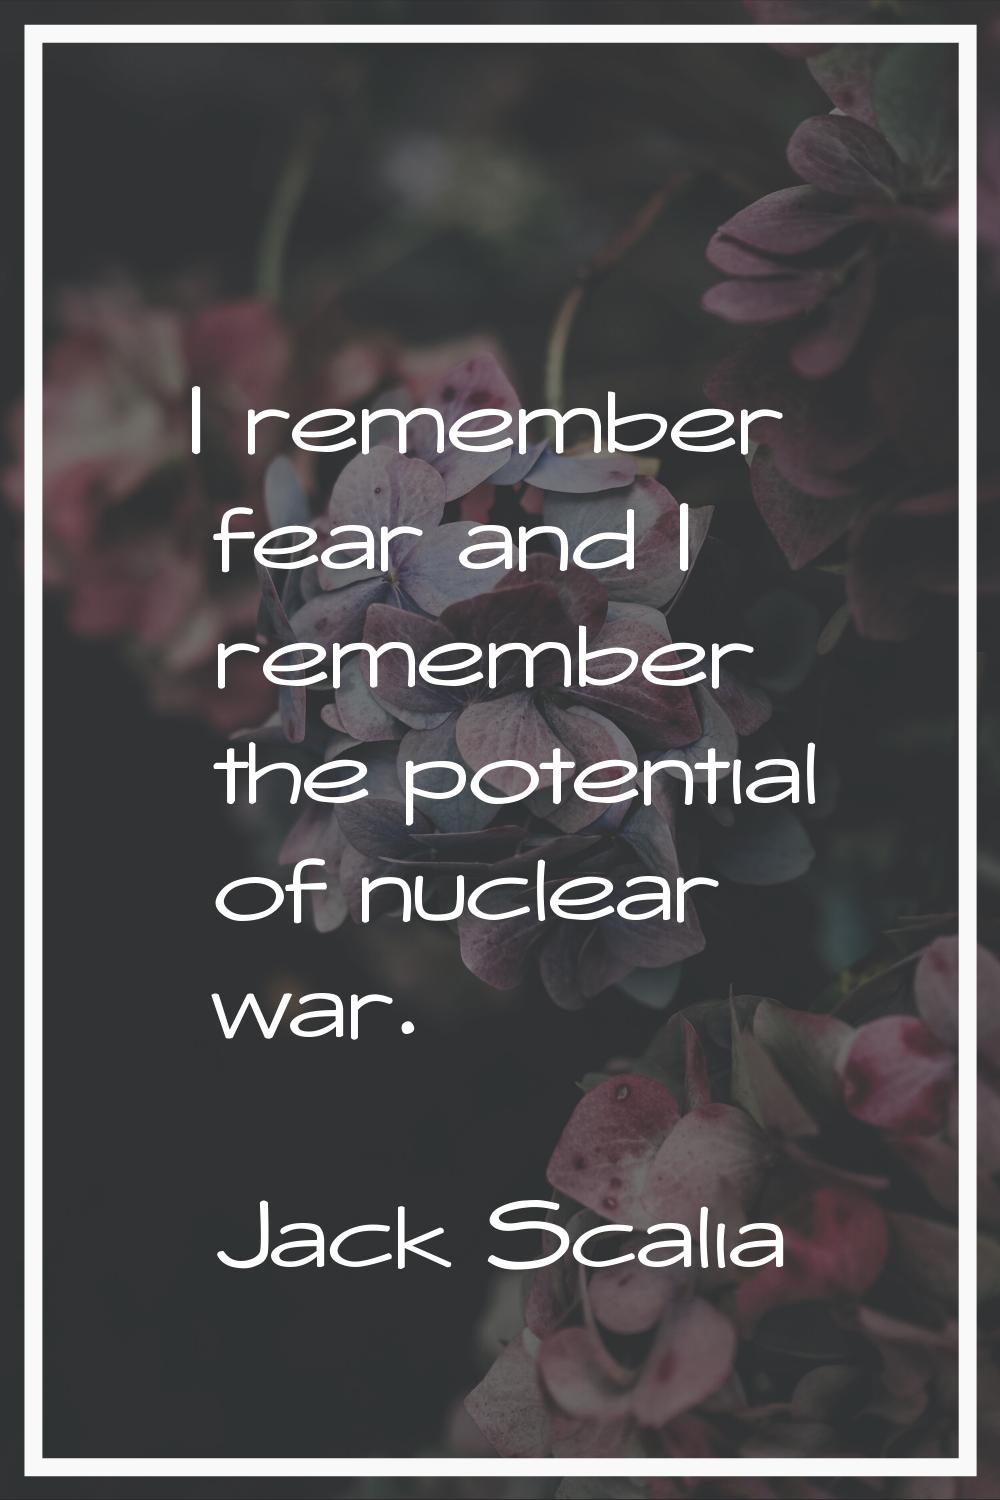 I remember fear and I remember the potential of nuclear war.